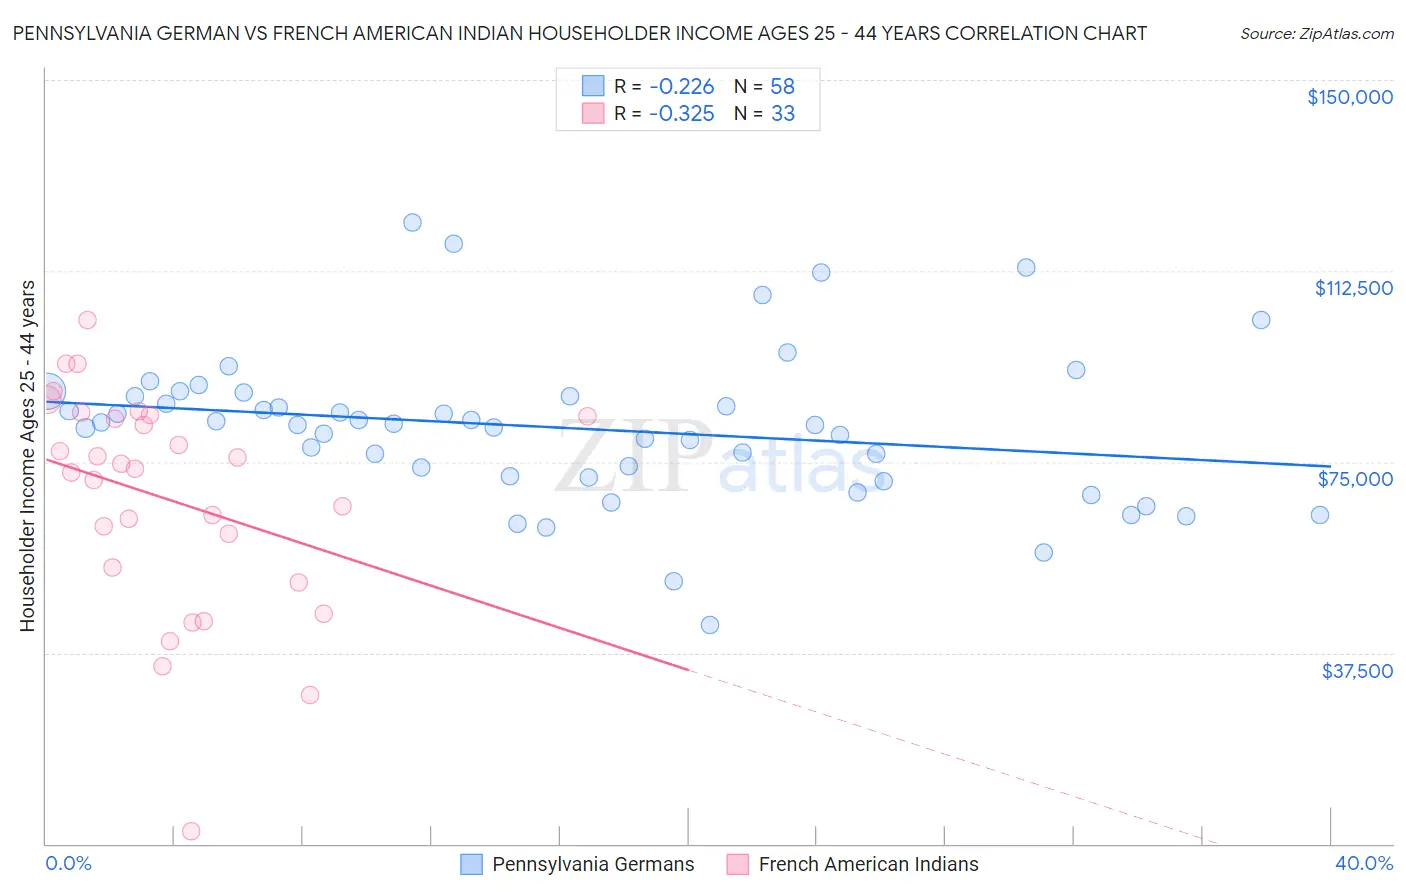 Pennsylvania German vs French American Indian Householder Income Ages 25 - 44 years